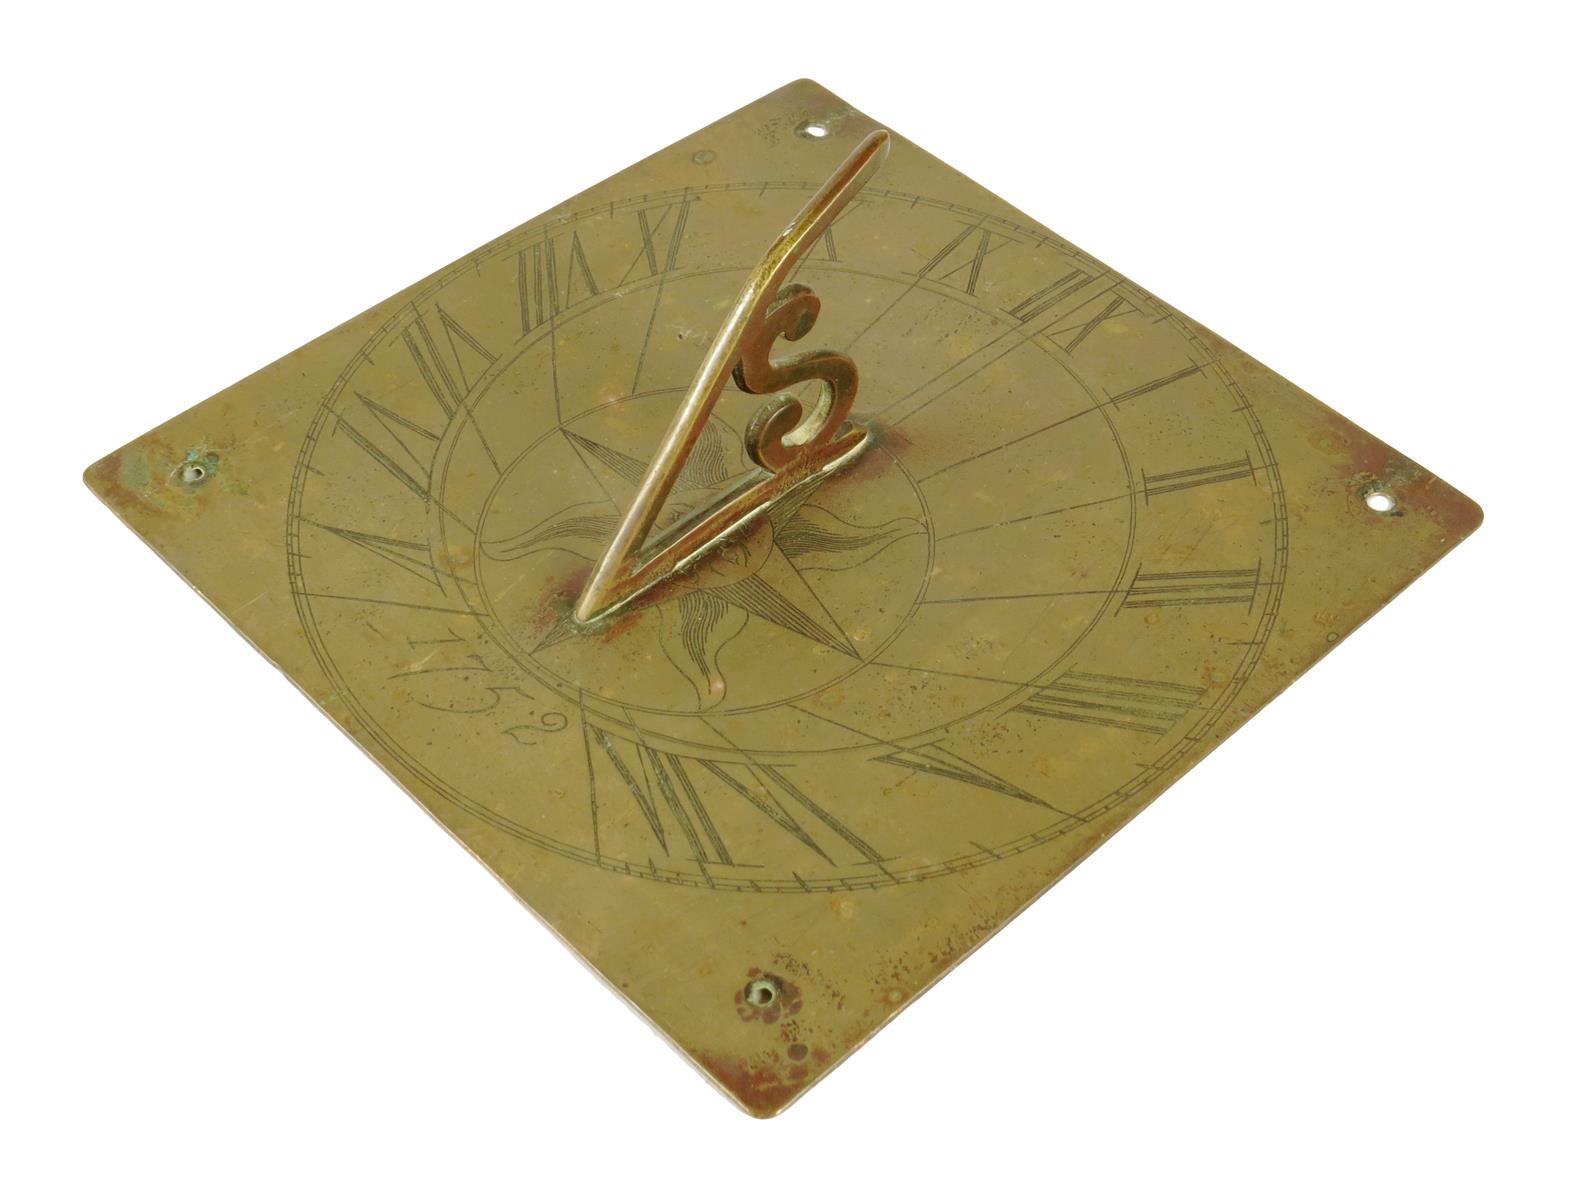 A brass sundial, with an 'S' shaped gnomon and engraved with a sun head and the date '1752', 20.1